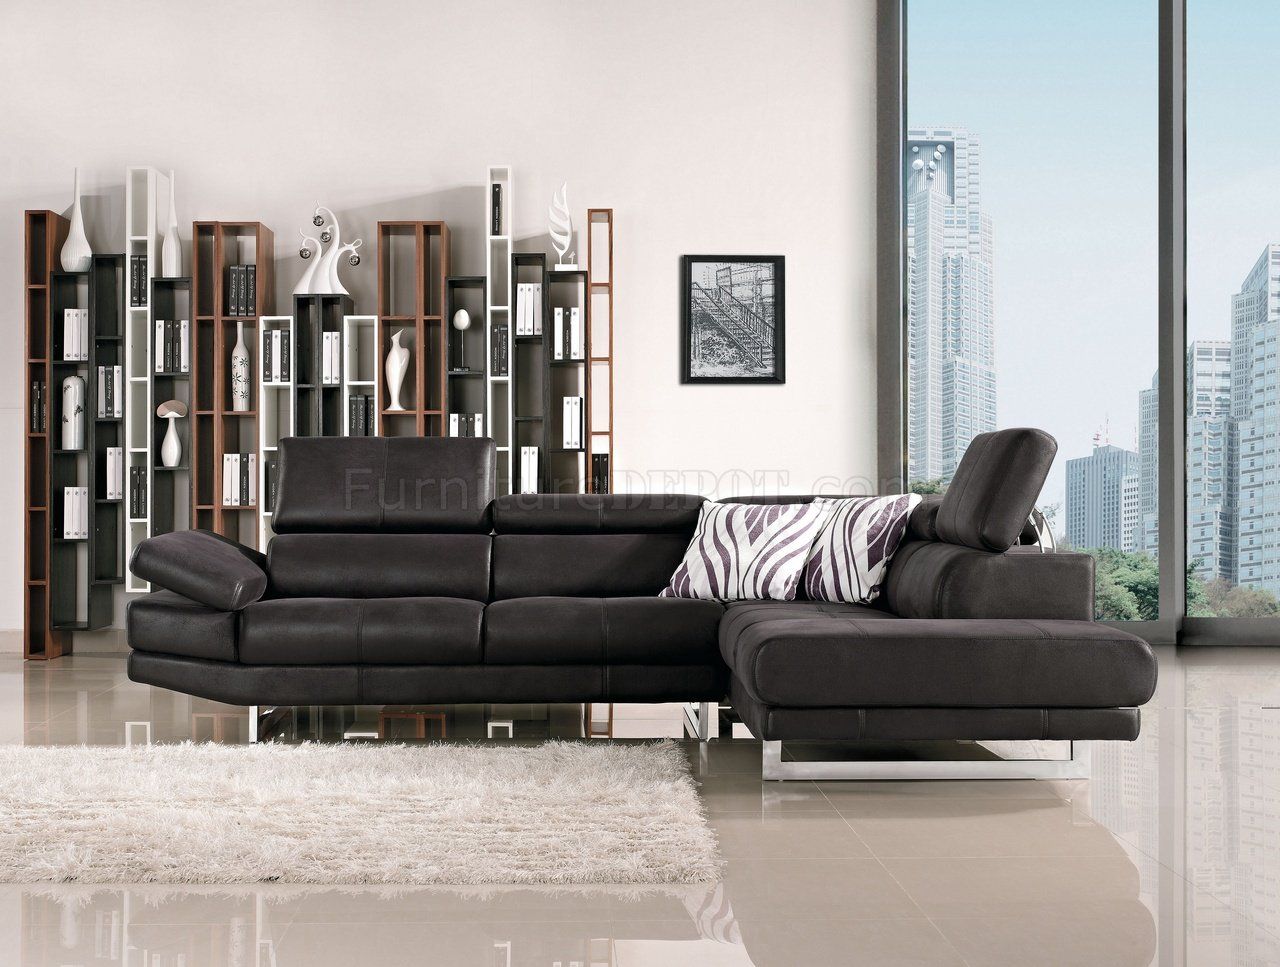 Black Fabric Modern Sectional Sofa W/adjustable Headrest Regarding Wynne Contemporary Sectional Sofas Black (View 2 of 15)